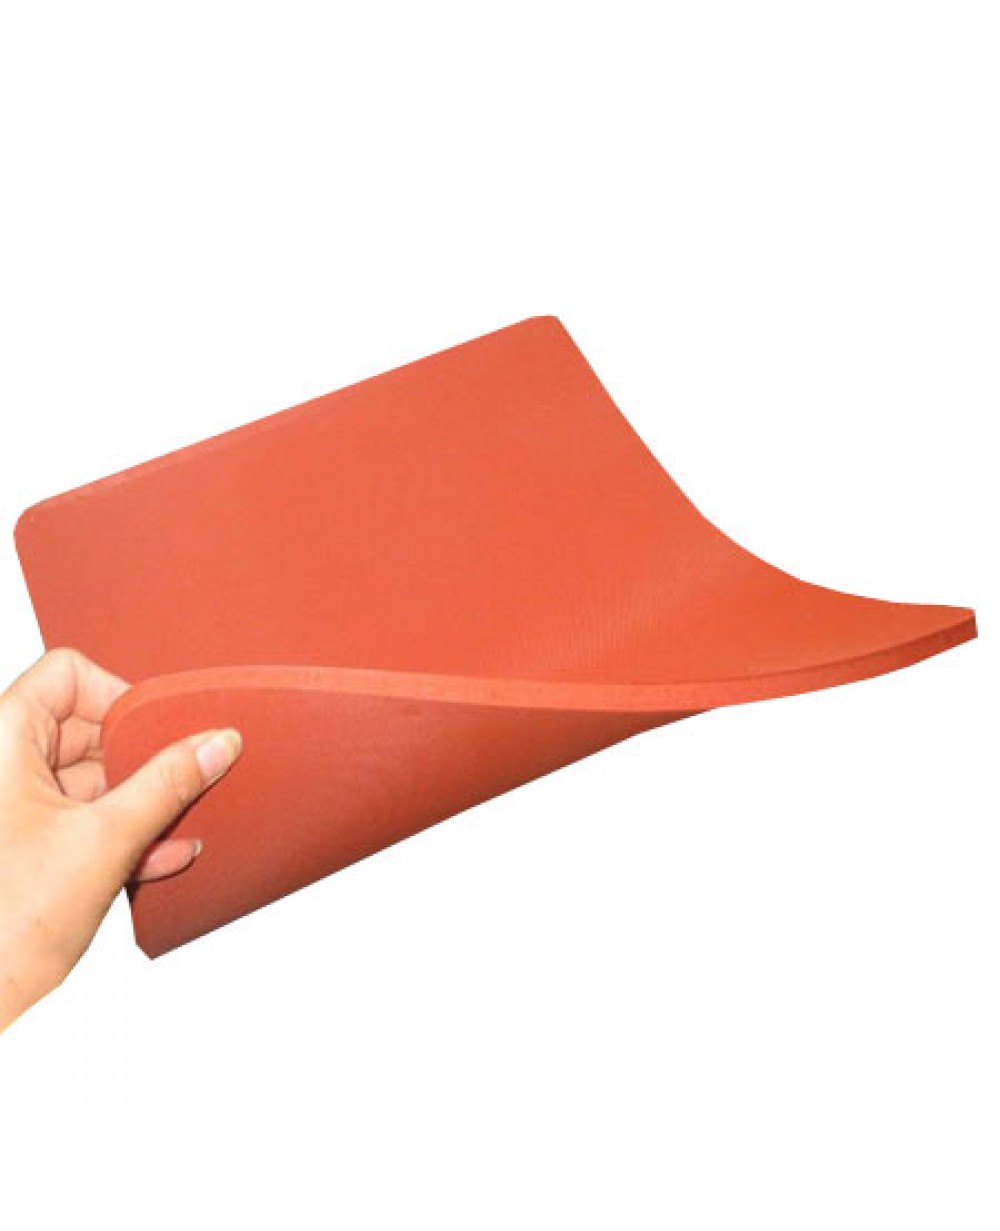 Silicone Heat Resistant Mat for Heat Press Machine